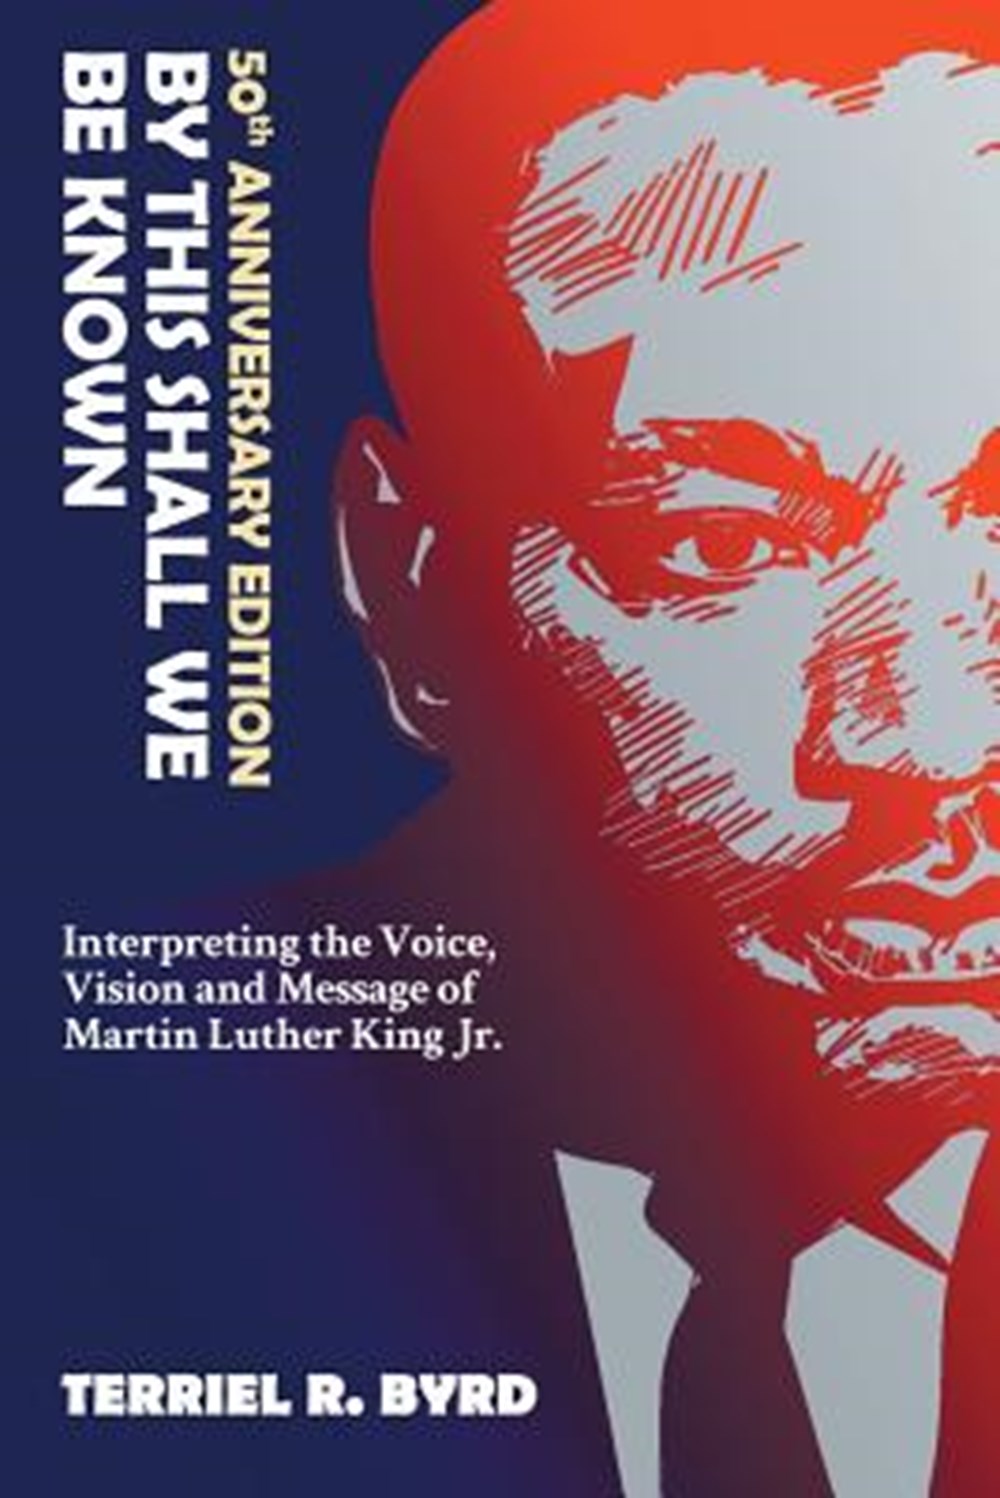 By This Shall We Be Known Interpreting the Voice, Vision and Message of Martin Luther King Jr.